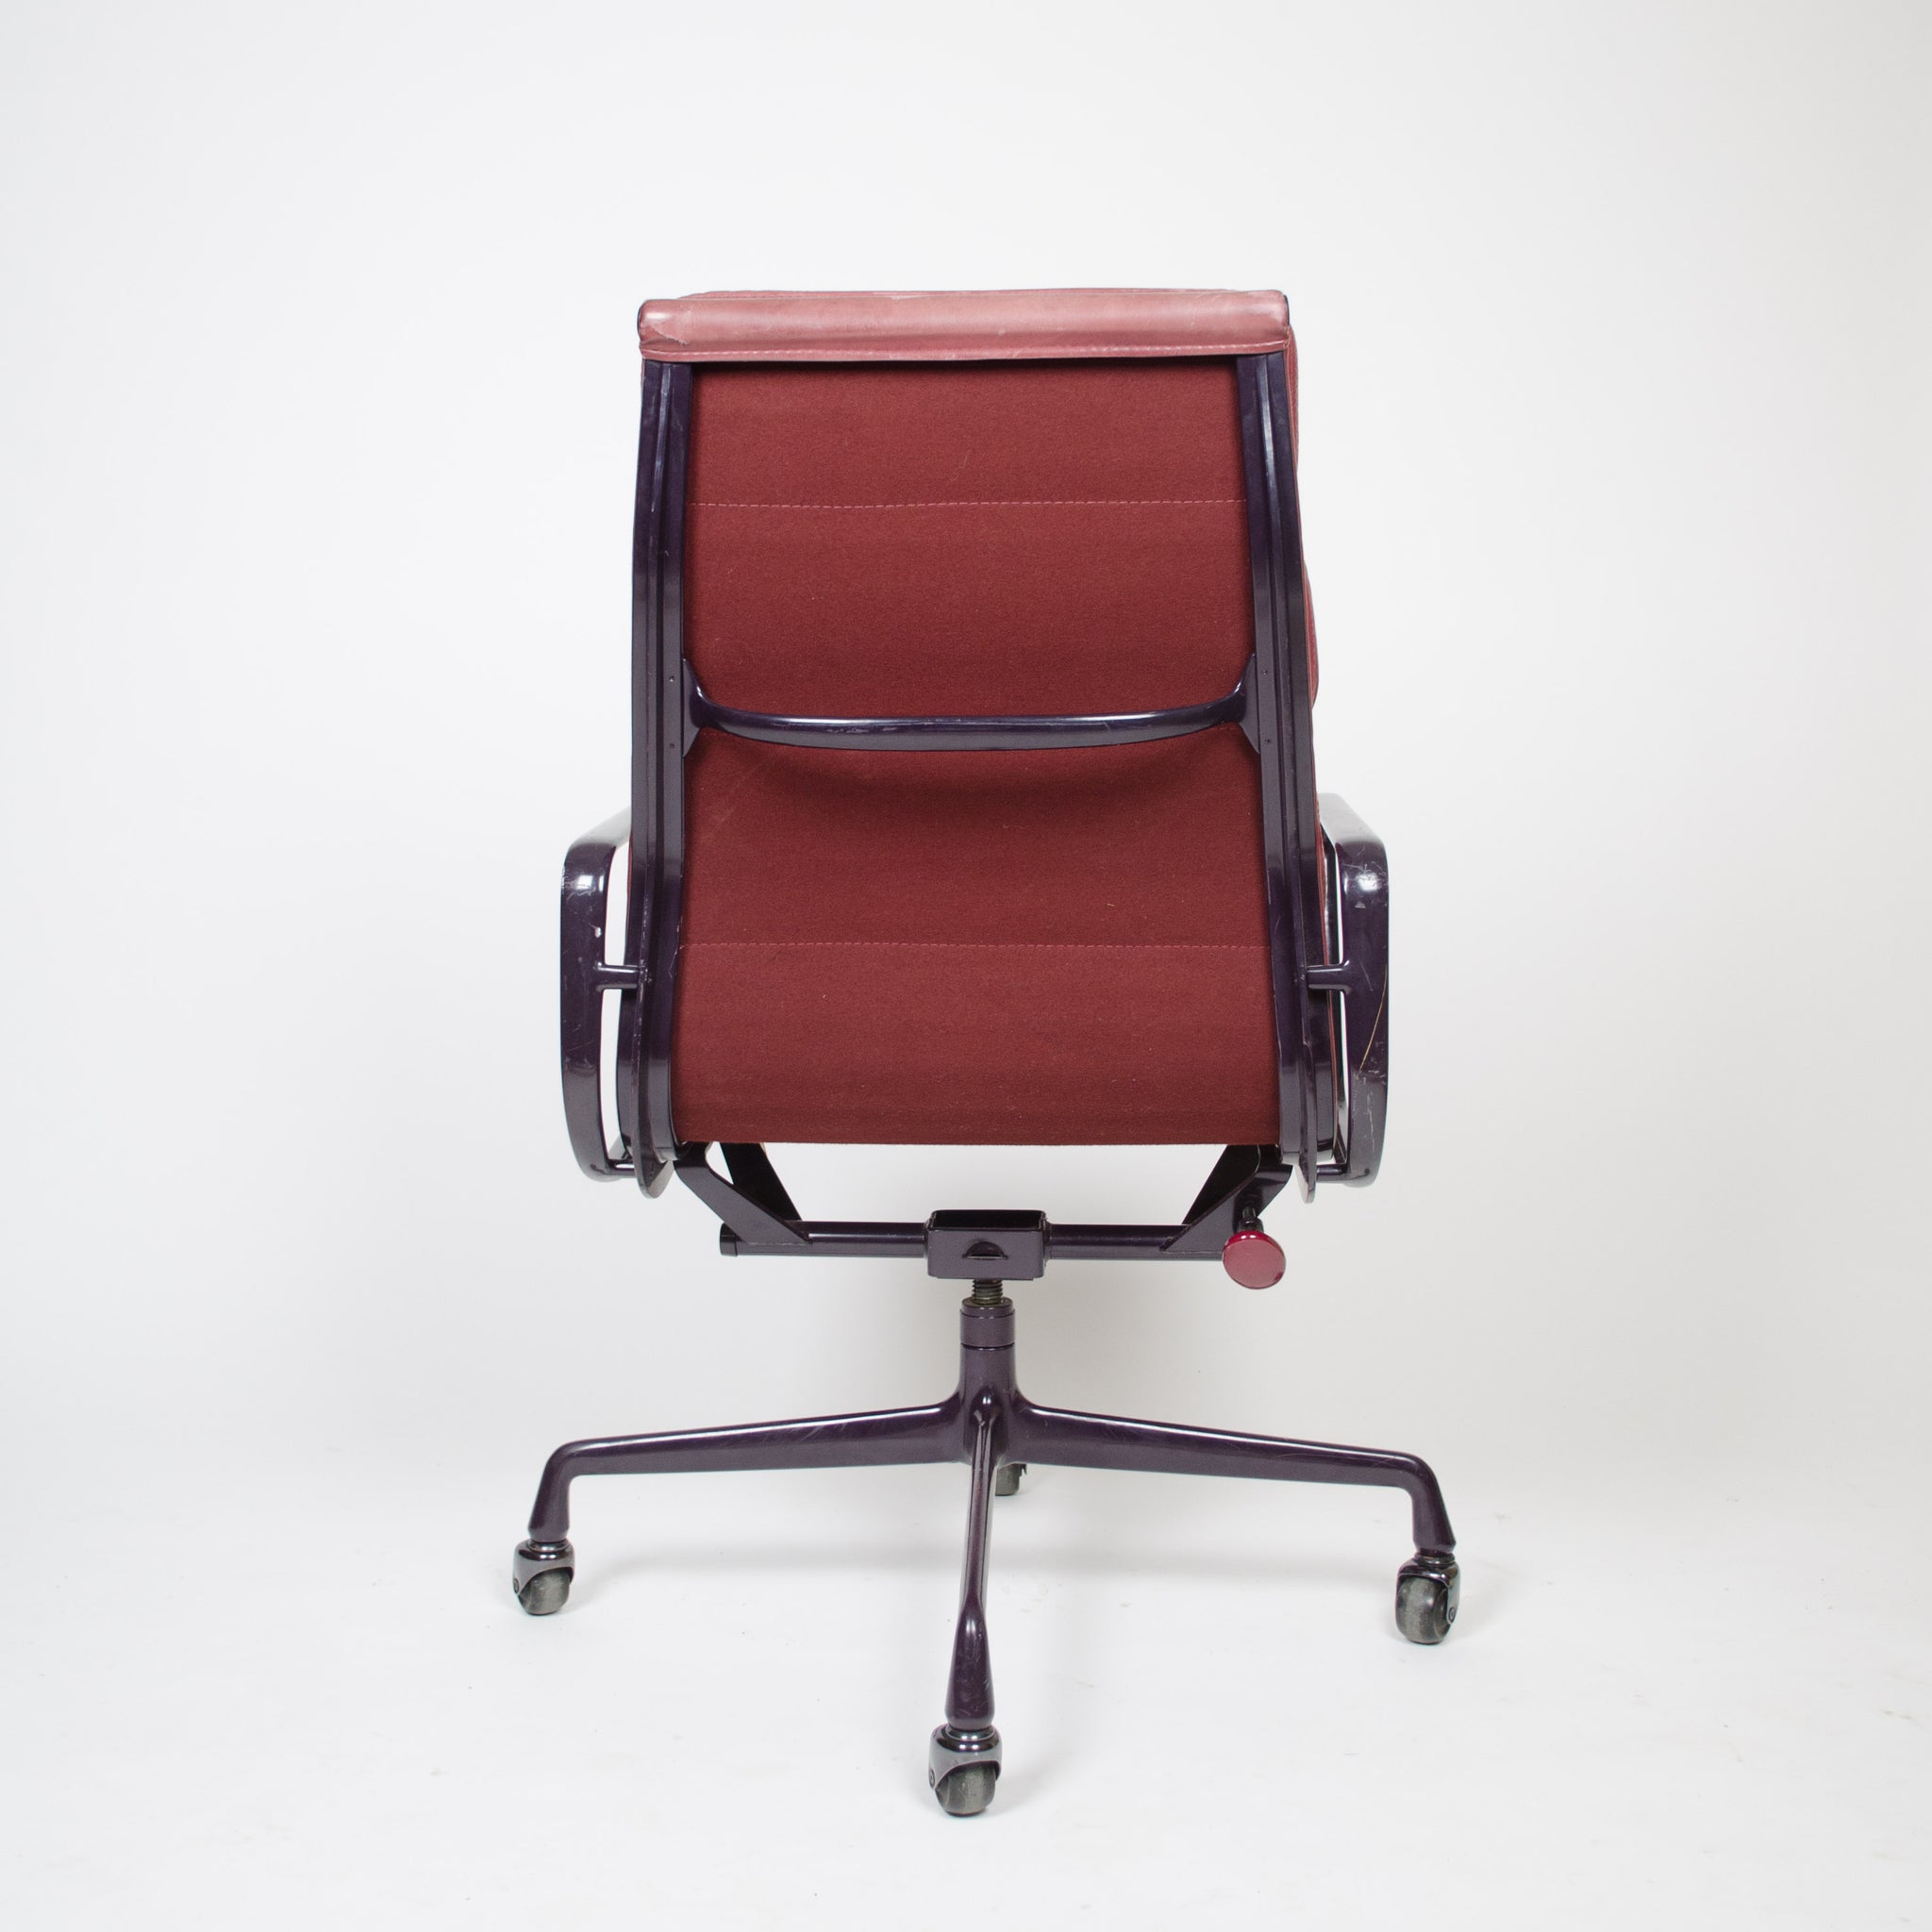 SOLD Leather Eames Herman Miller Soft Pad High Back Aluminum Group Chair 1985